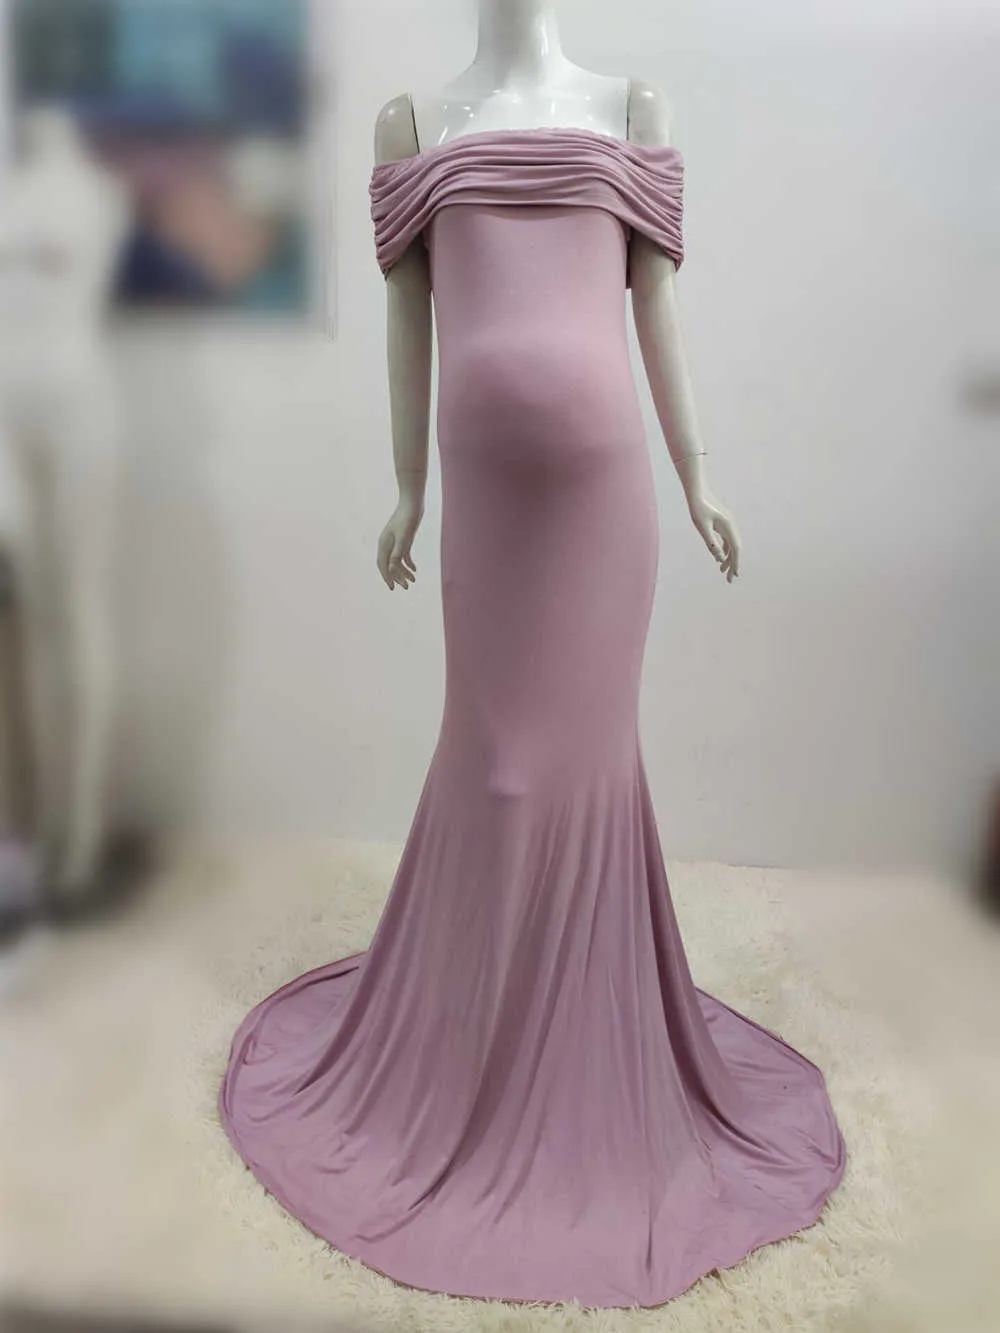 Shoulderless Maternity Dresses Photography Props Long Pregnancy Dress For Baby Shower Photo Shoots Pregnant Women Maxi Gown 2020 (4)